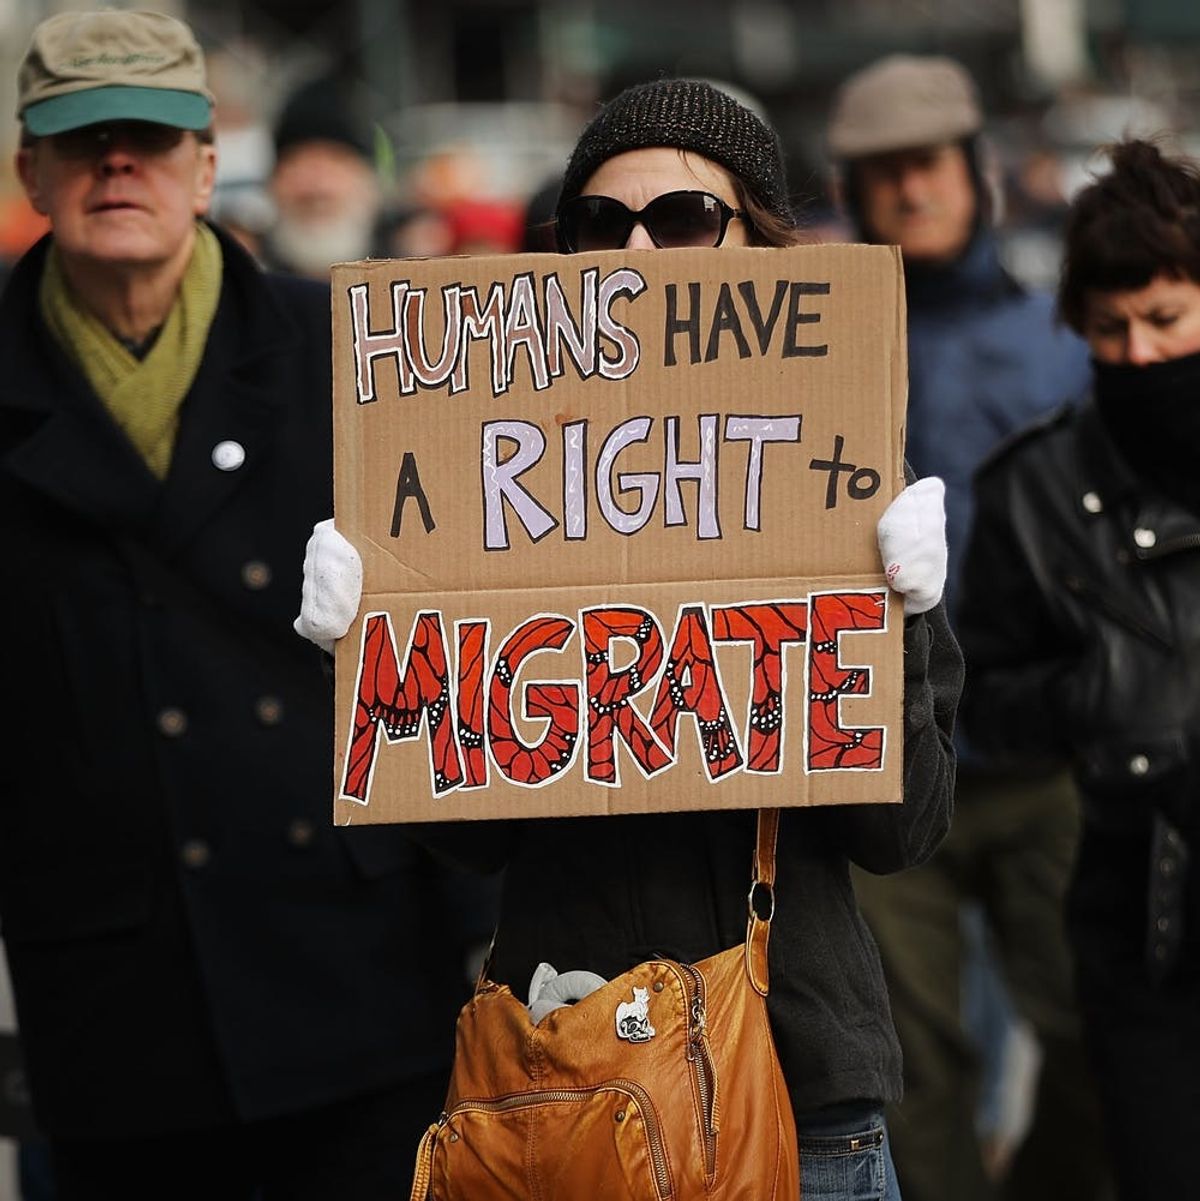 Two Professors Just Proposed What May Be the Worst Immigration Policy Idea Ever